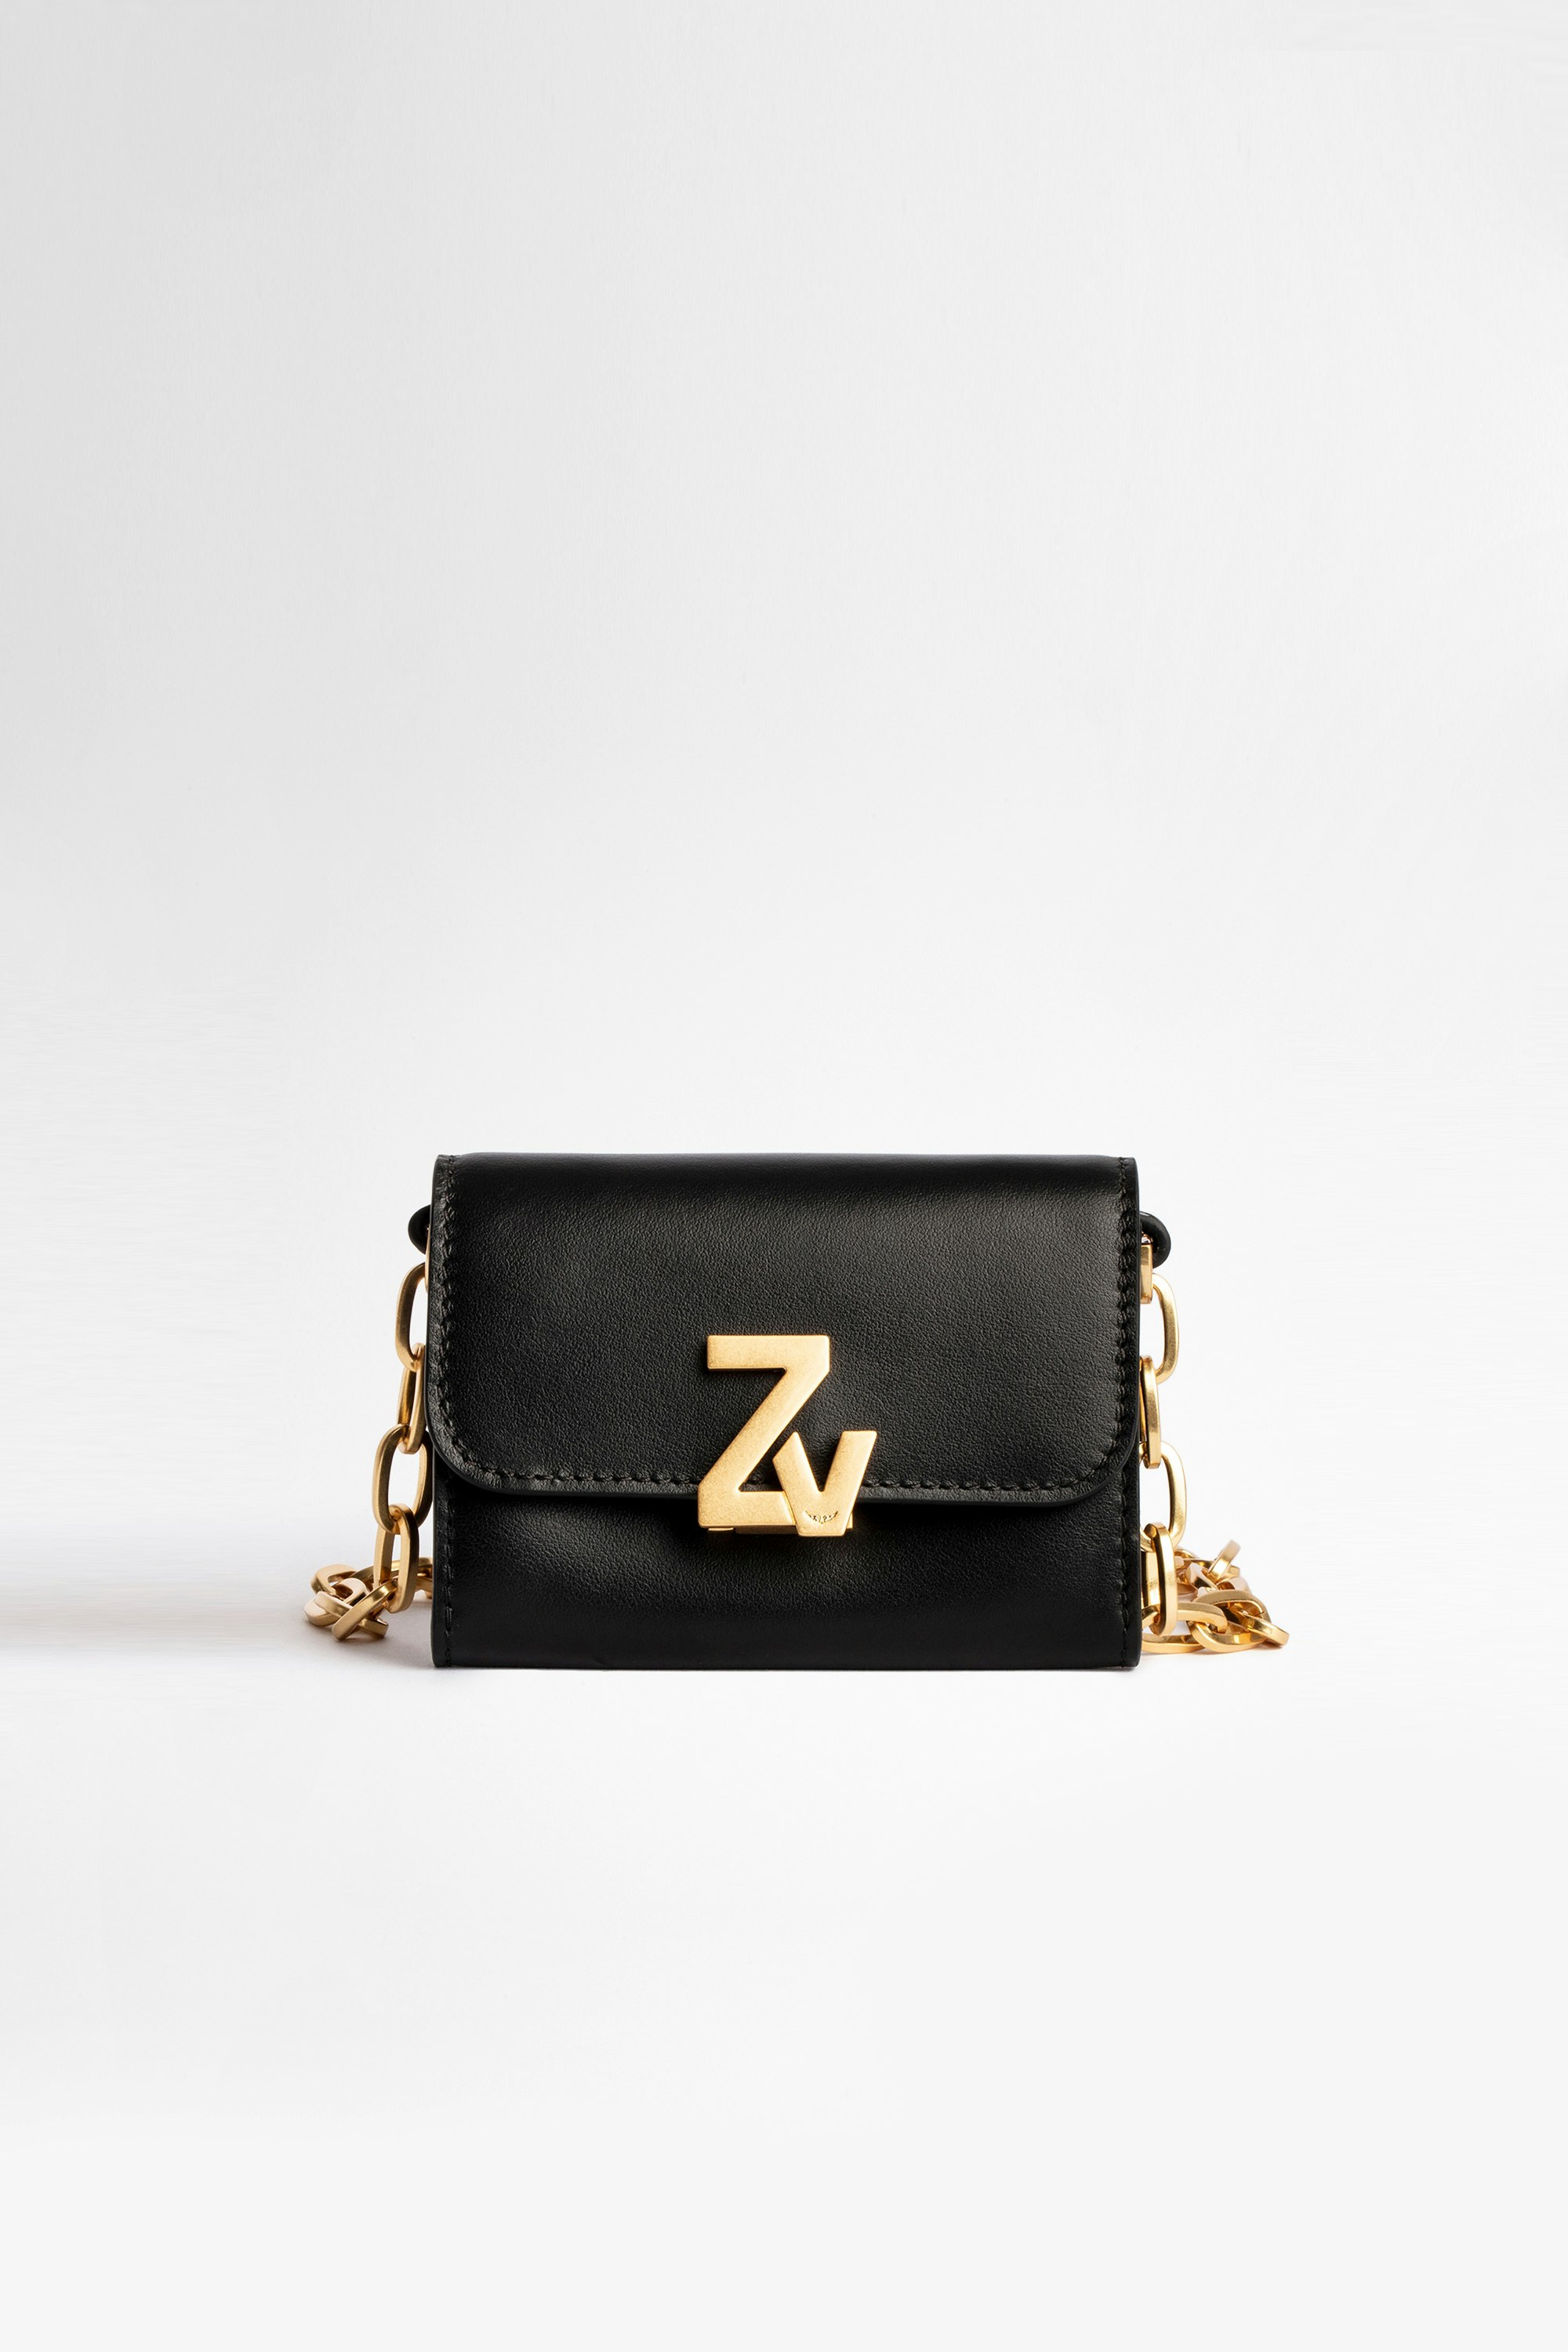 Sac Portefeuille ZV Initiale Le Tiny Unchained Portefeuille en cuir noir ZV initiale Noir Femme